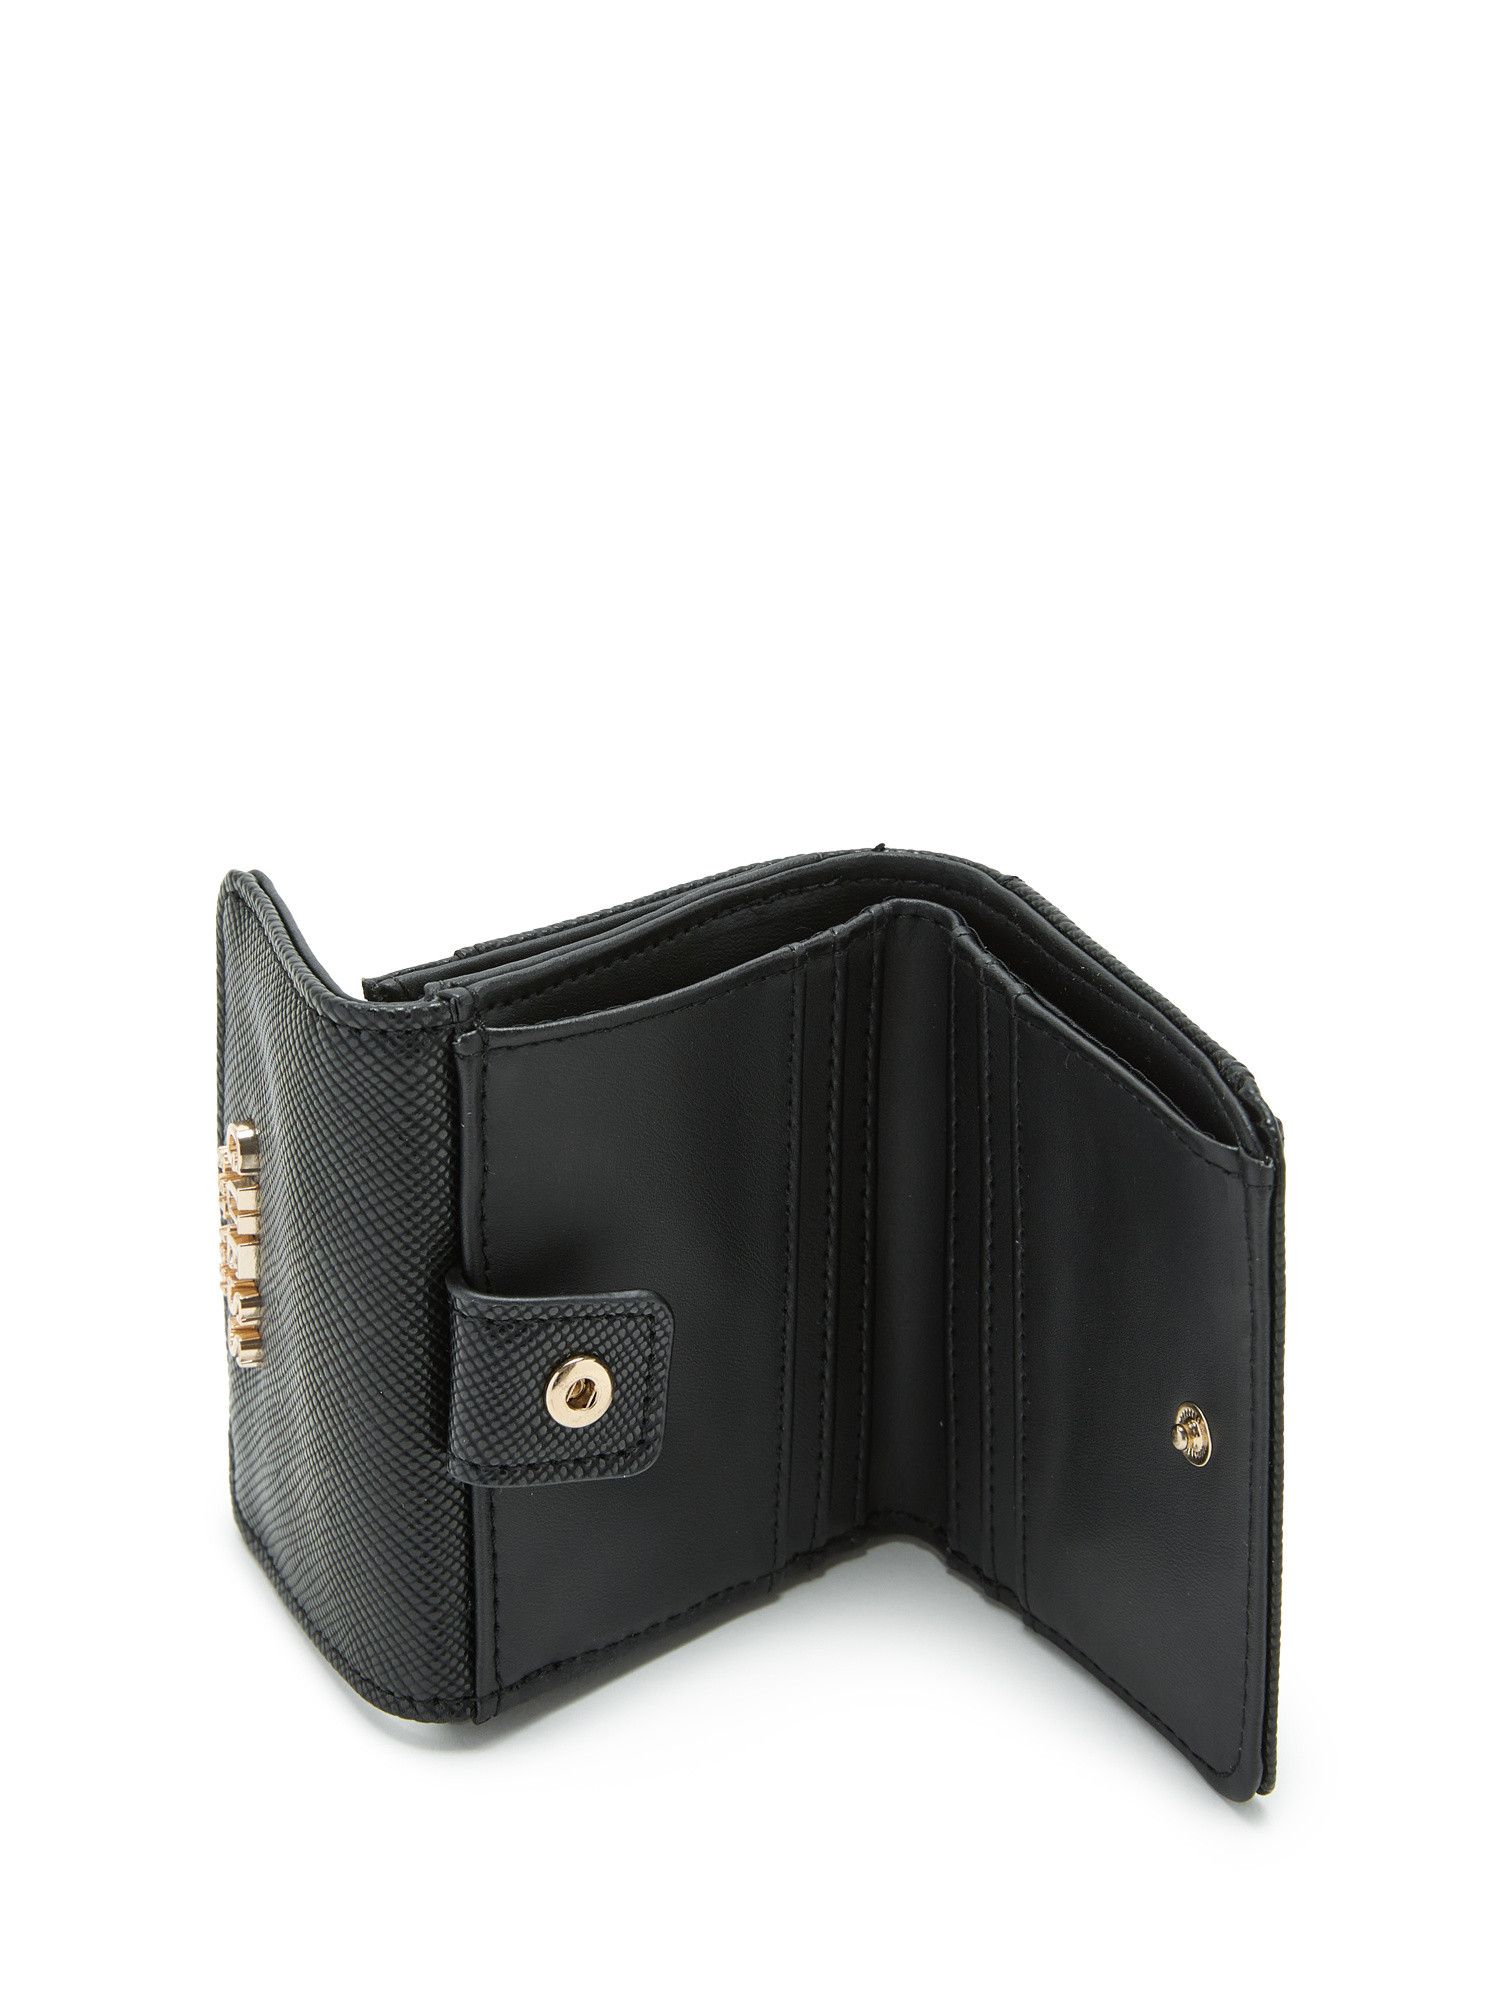 Guess - Wallet with logo, Black, large image number 2